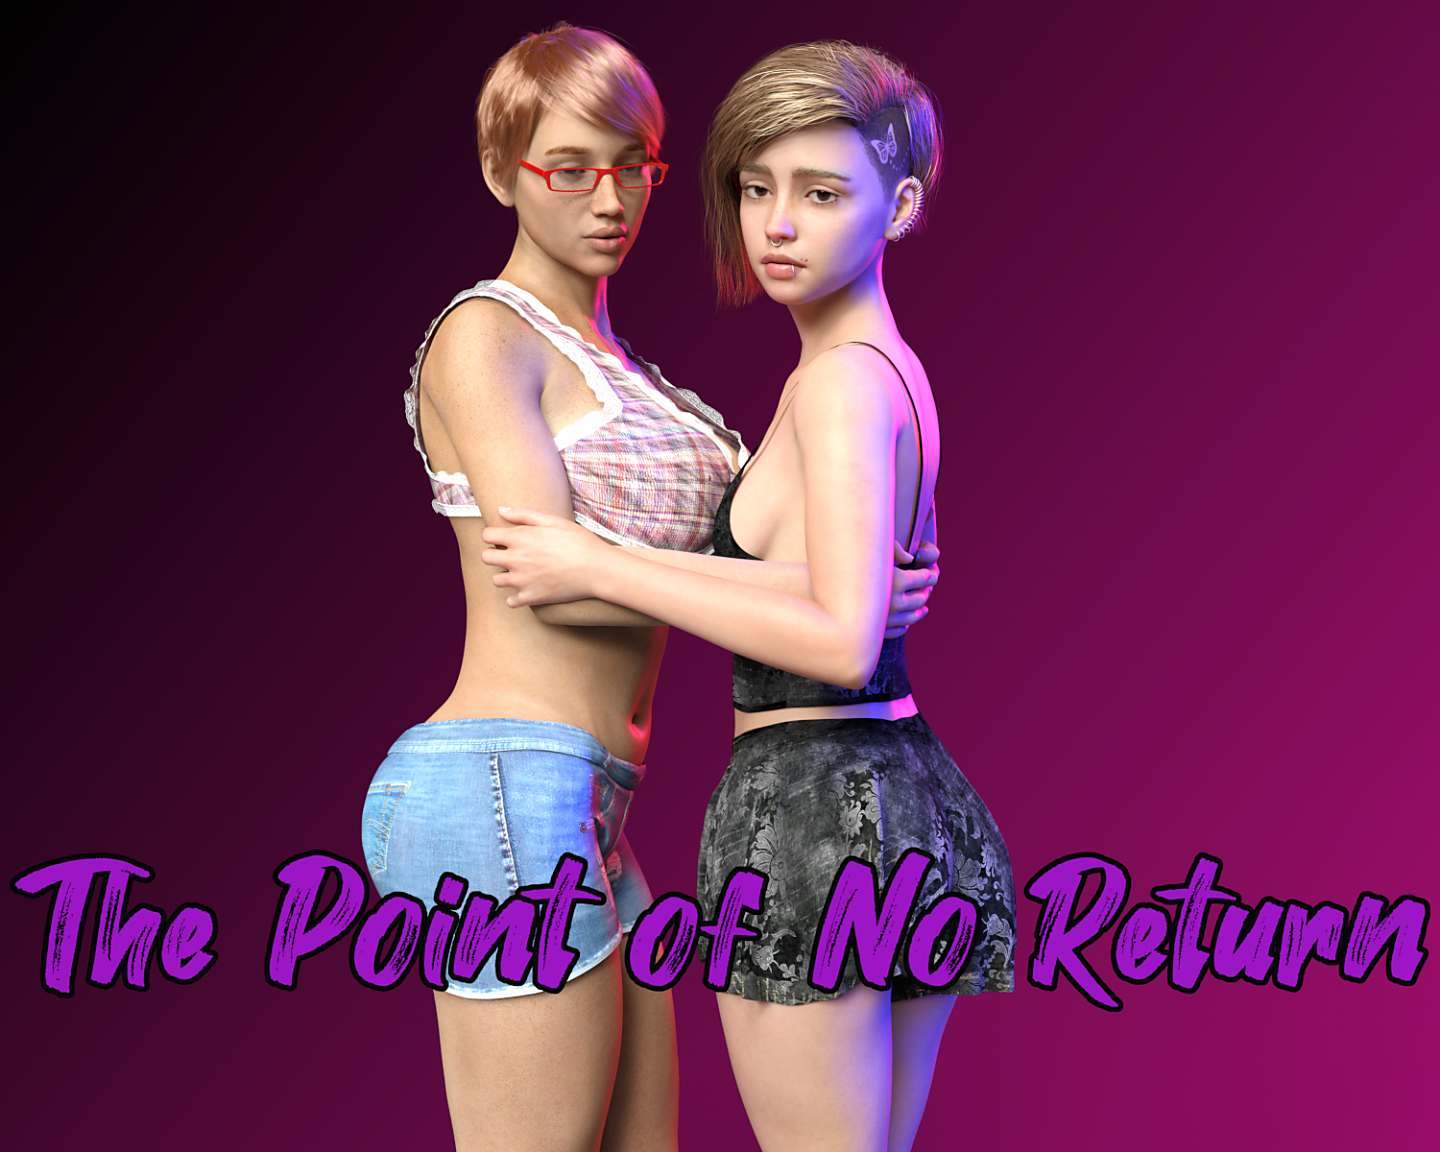 aruna iva recommends Point Of No Return Porn